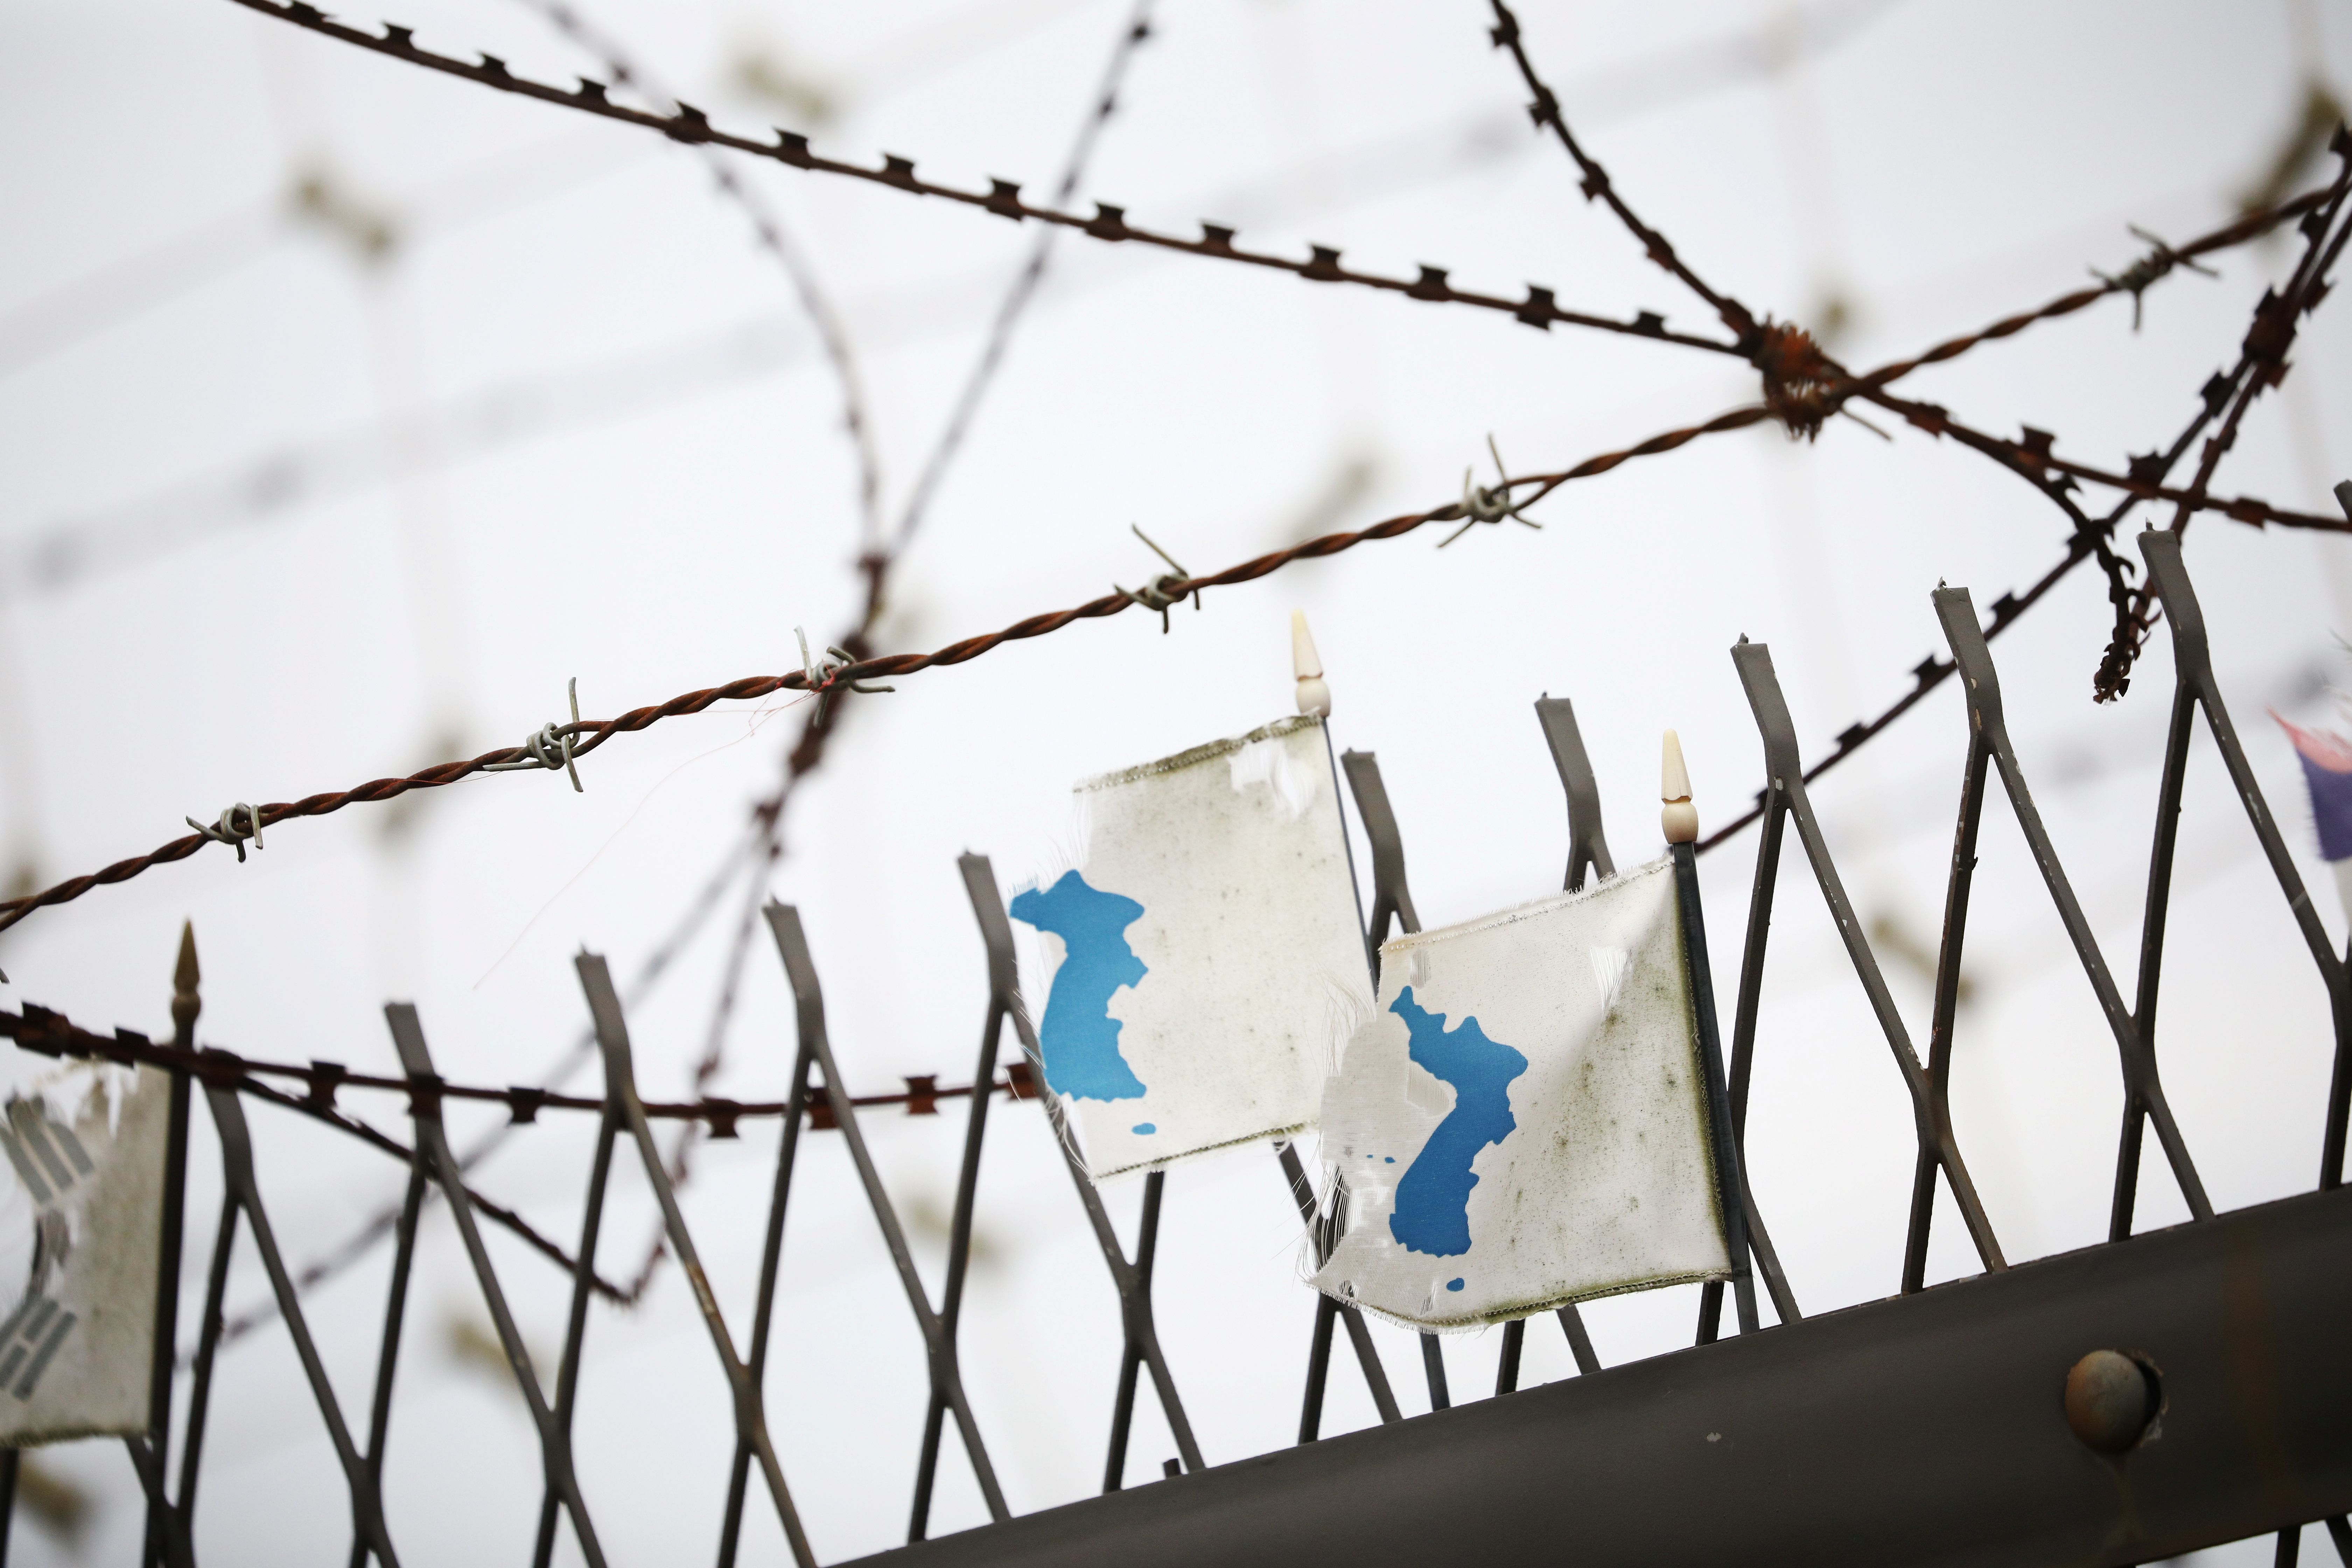 Korean Unification flags defaced by strong wind hang on a military fence near the demilitarized zone separating the two Koreas in Paju, South Korea, September 28, 2021. REUTERS/Kim Hong-Ji